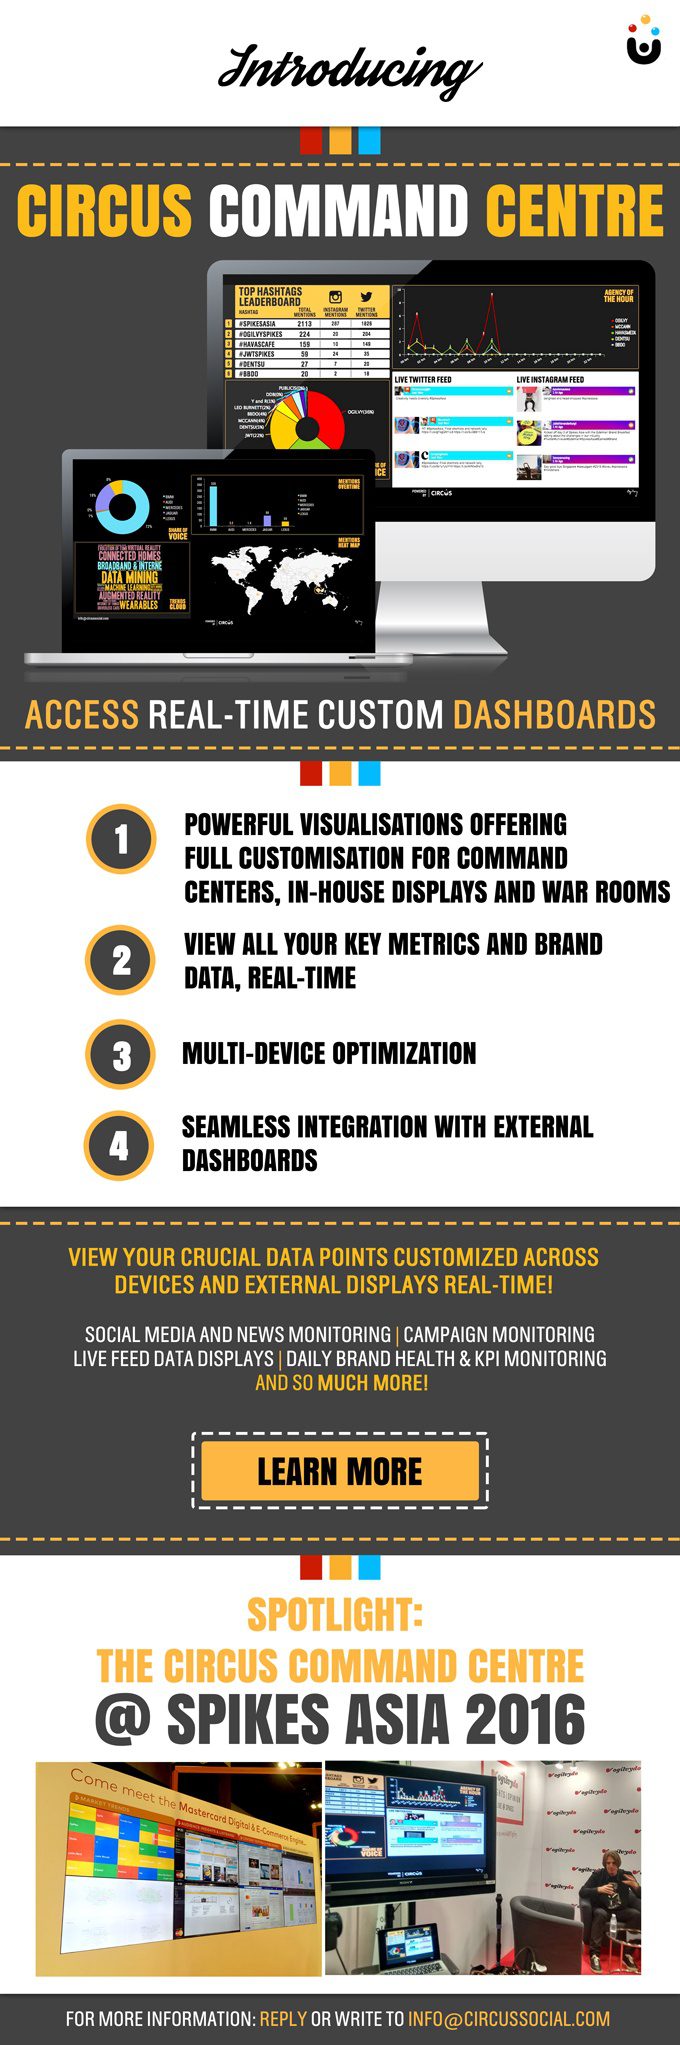 View all your key KPIs in one custom dashboard - The Circus Command Centre!